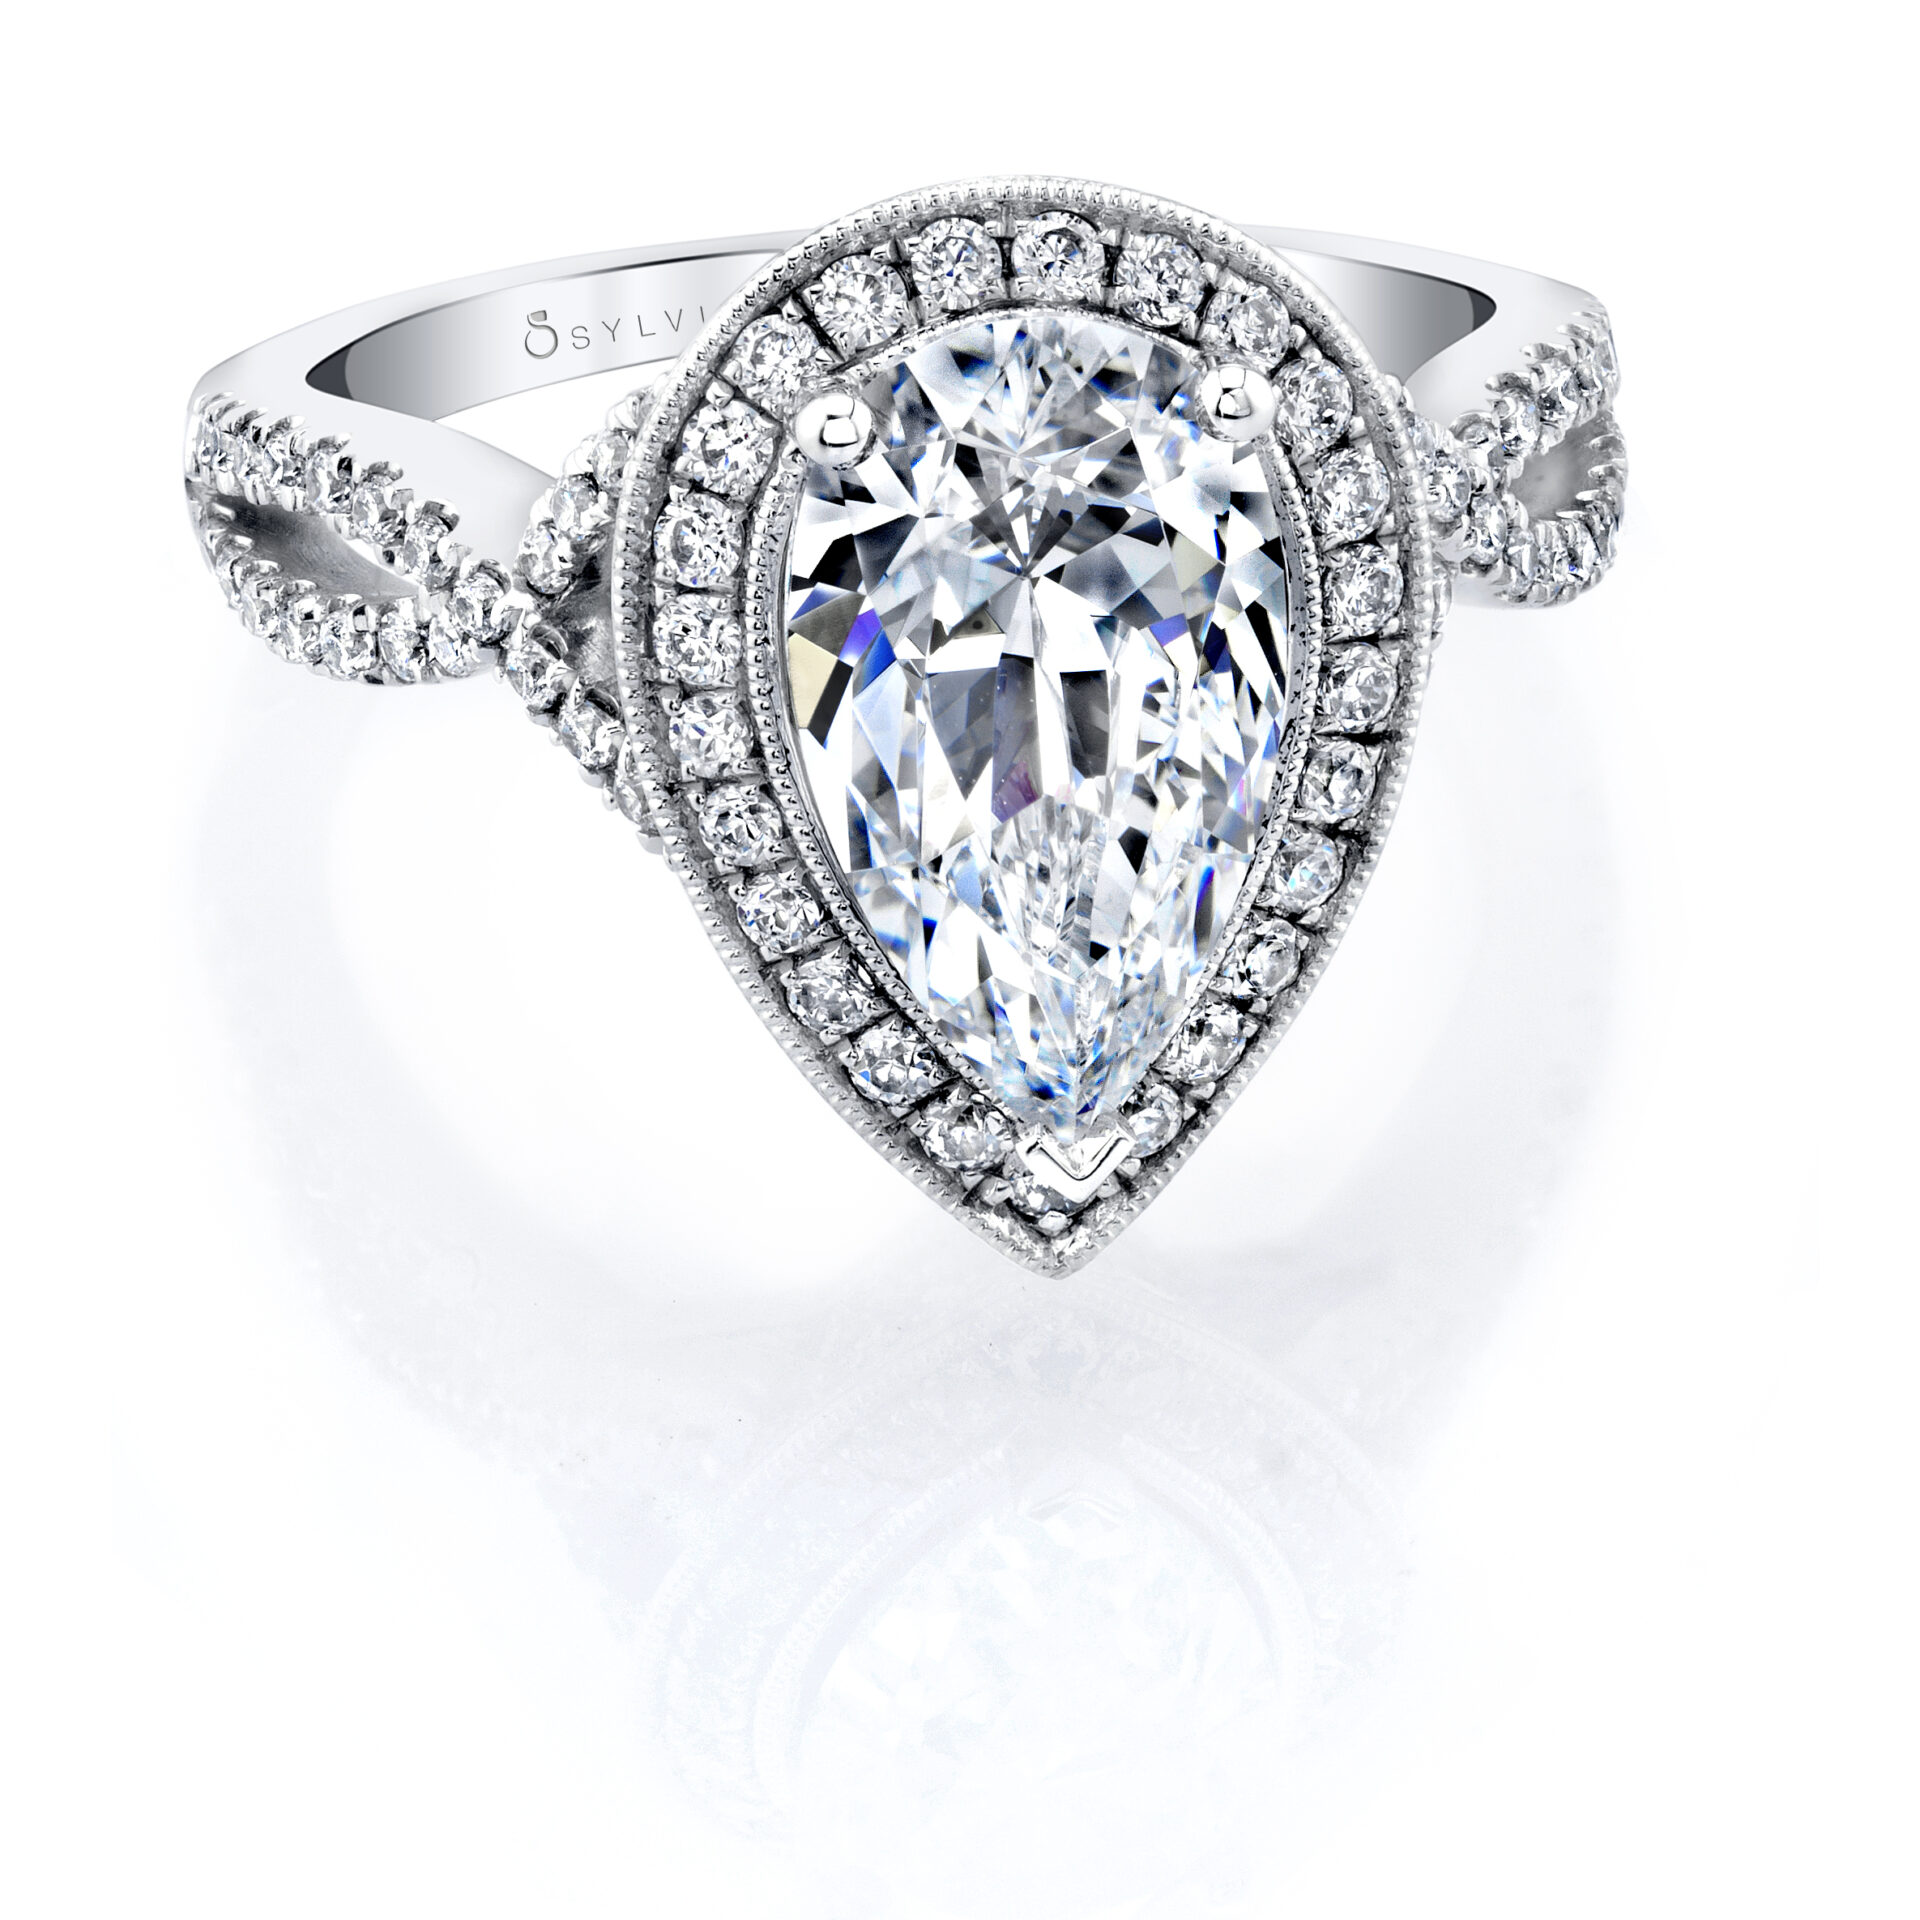 Pear Shaped Engagement Ring with Halo - Alyssa